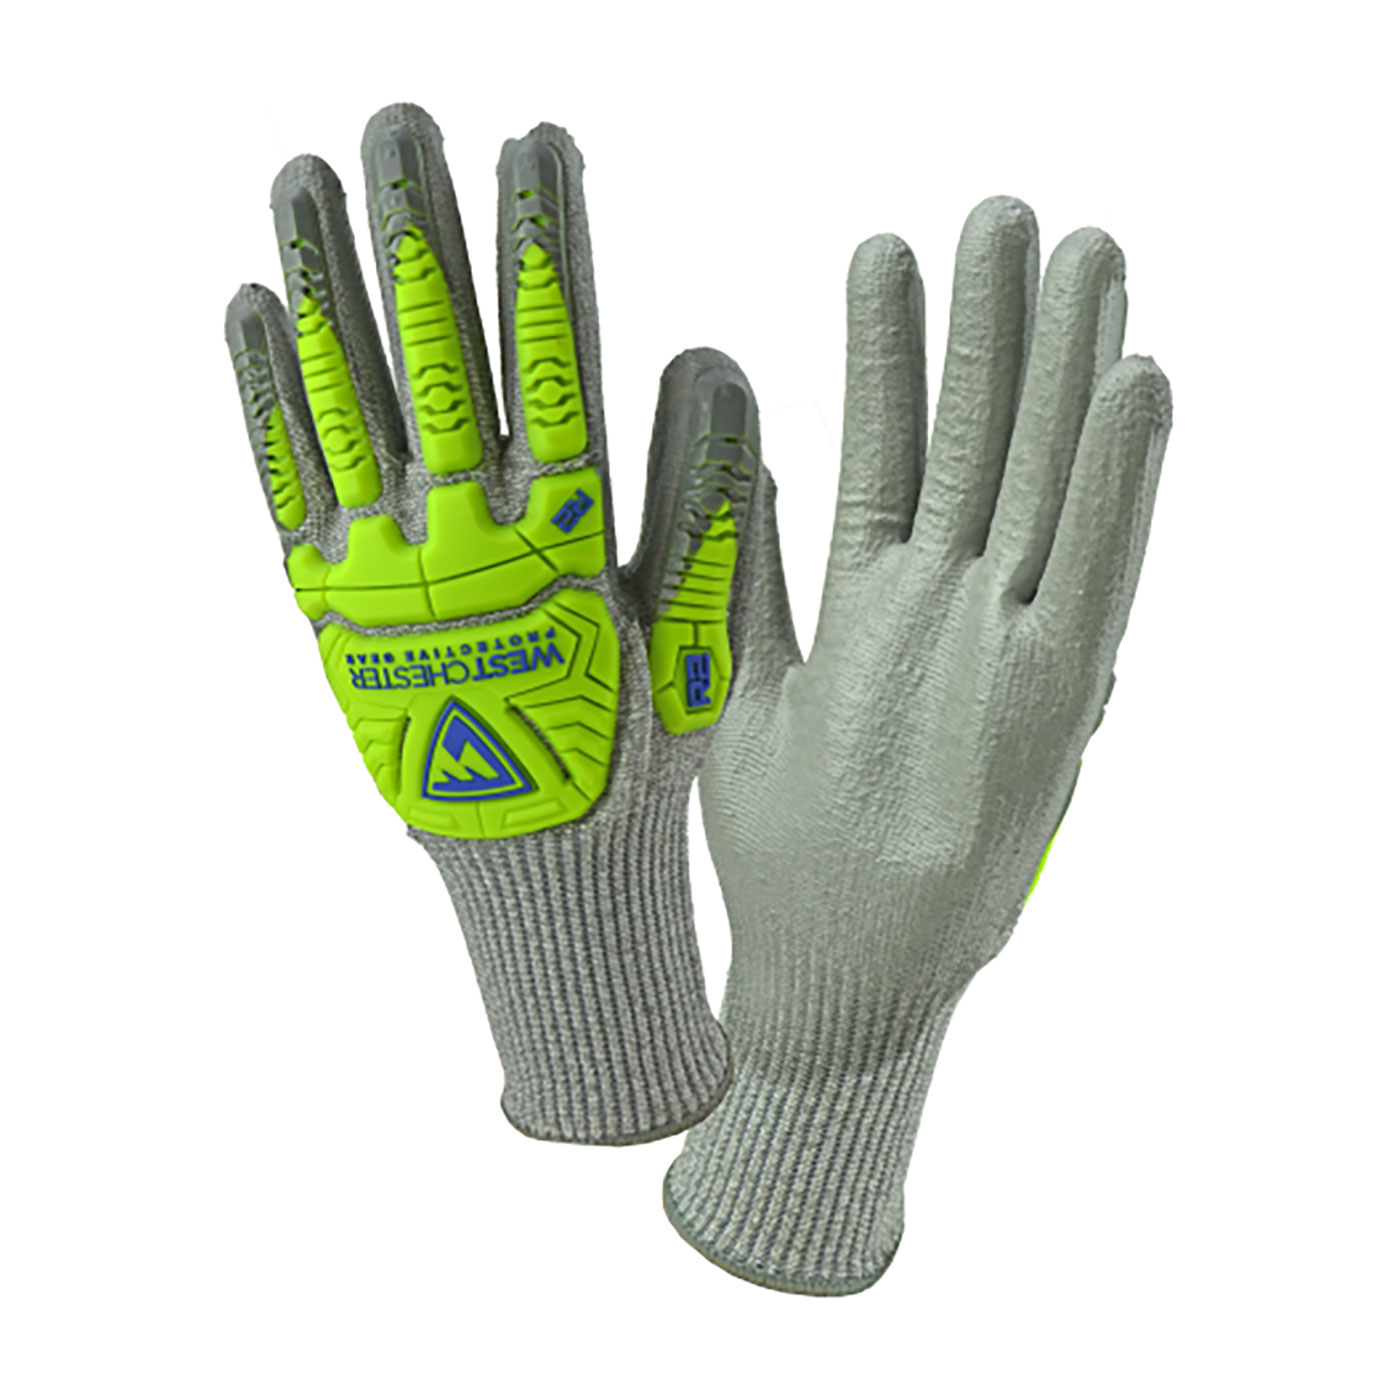 #710HGUBHVG PIP® R2 Silver Fox Seamless Knit Glove with Hi-Vis Impact Protection and PU Coated Palm Grip